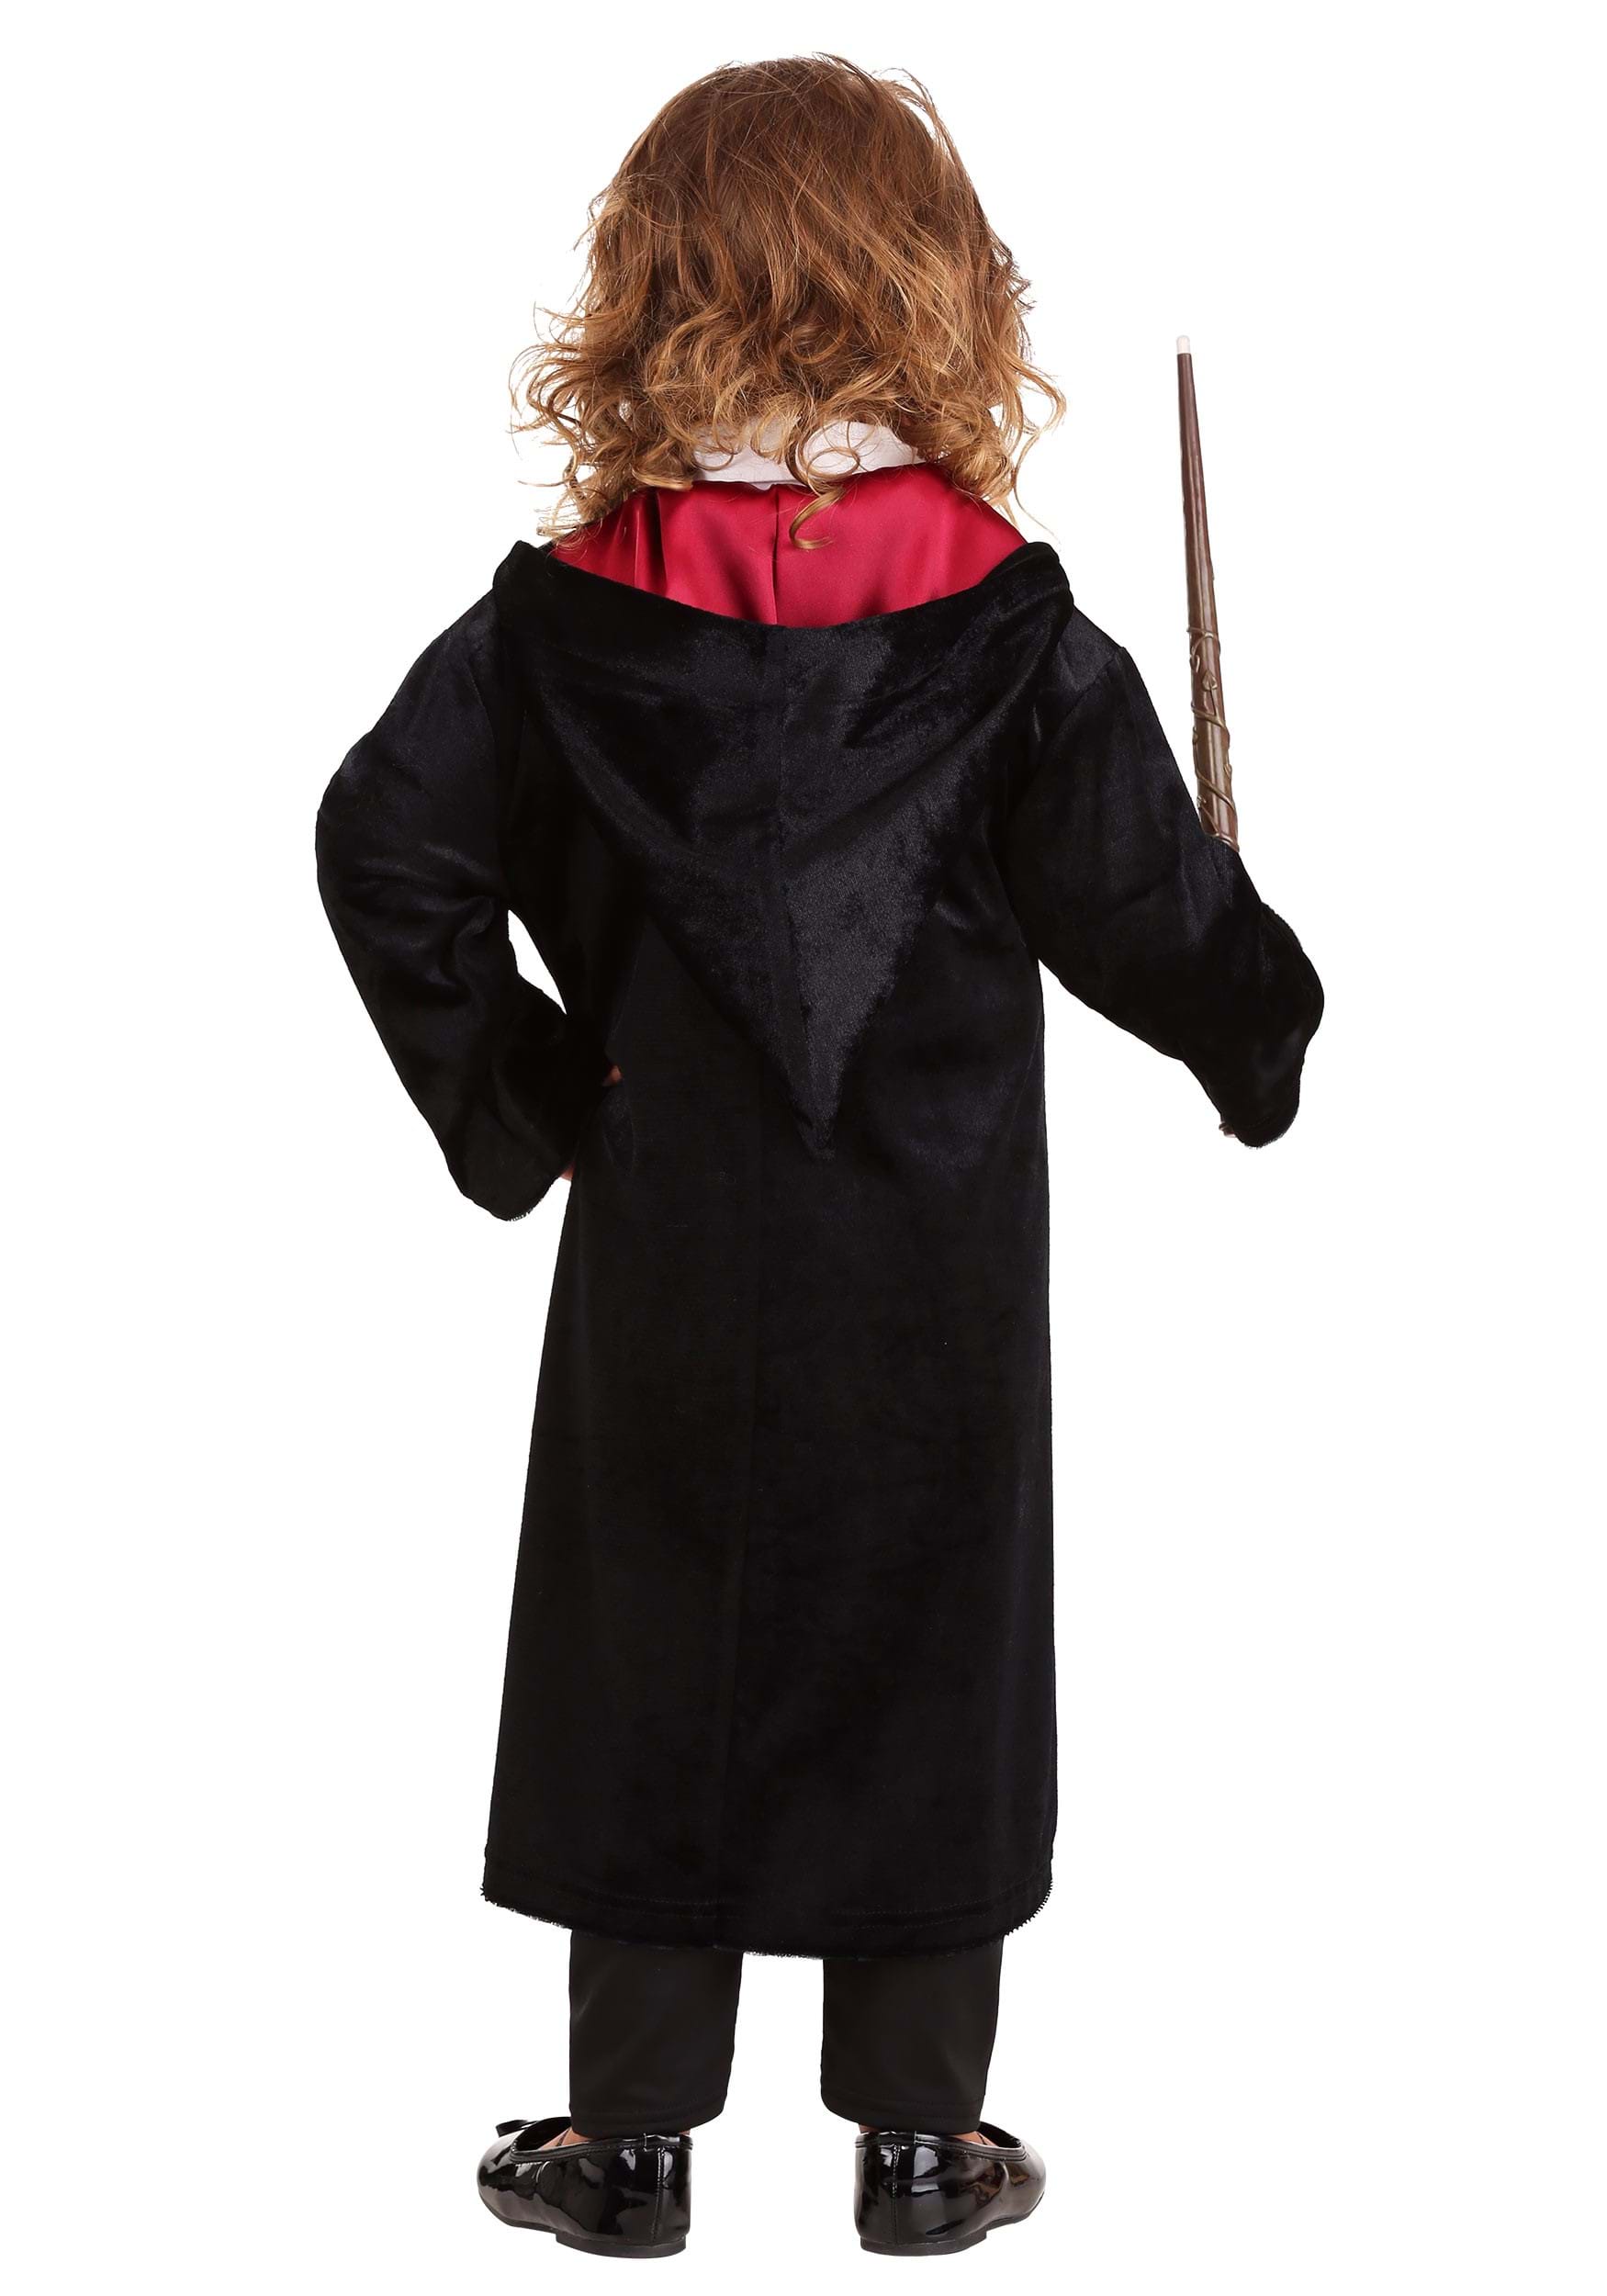 Toddler's Harry Potter Deluxe Gryffindor Robe Costume